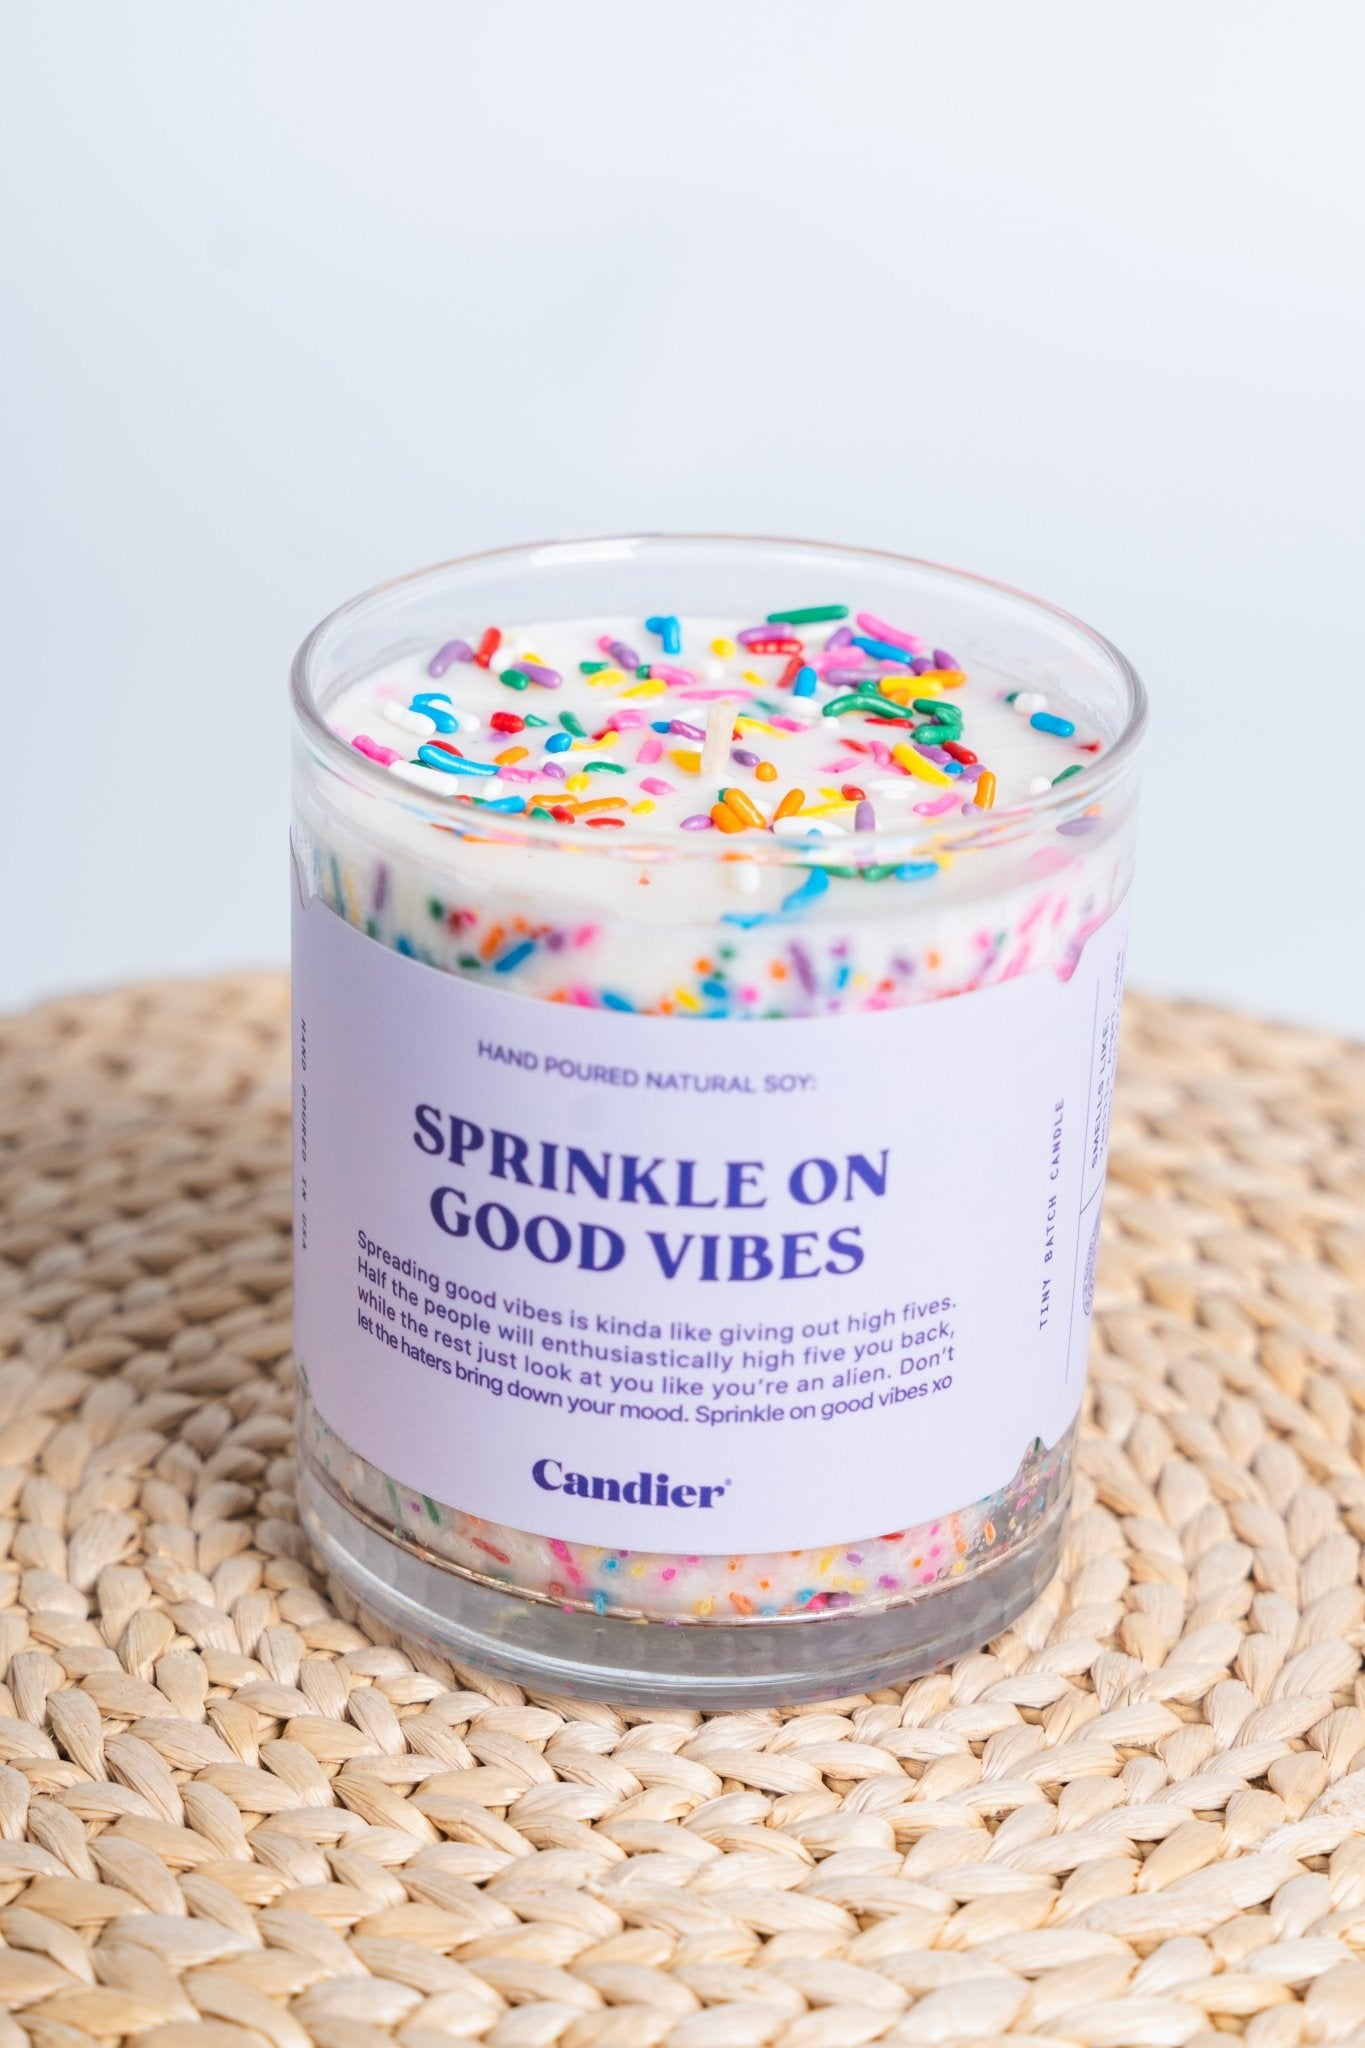 Sprinkle on good vibes candle 9 oz - Trendy Candles and Scents at Lush Fashion Lounge Boutique in Oklahoma City